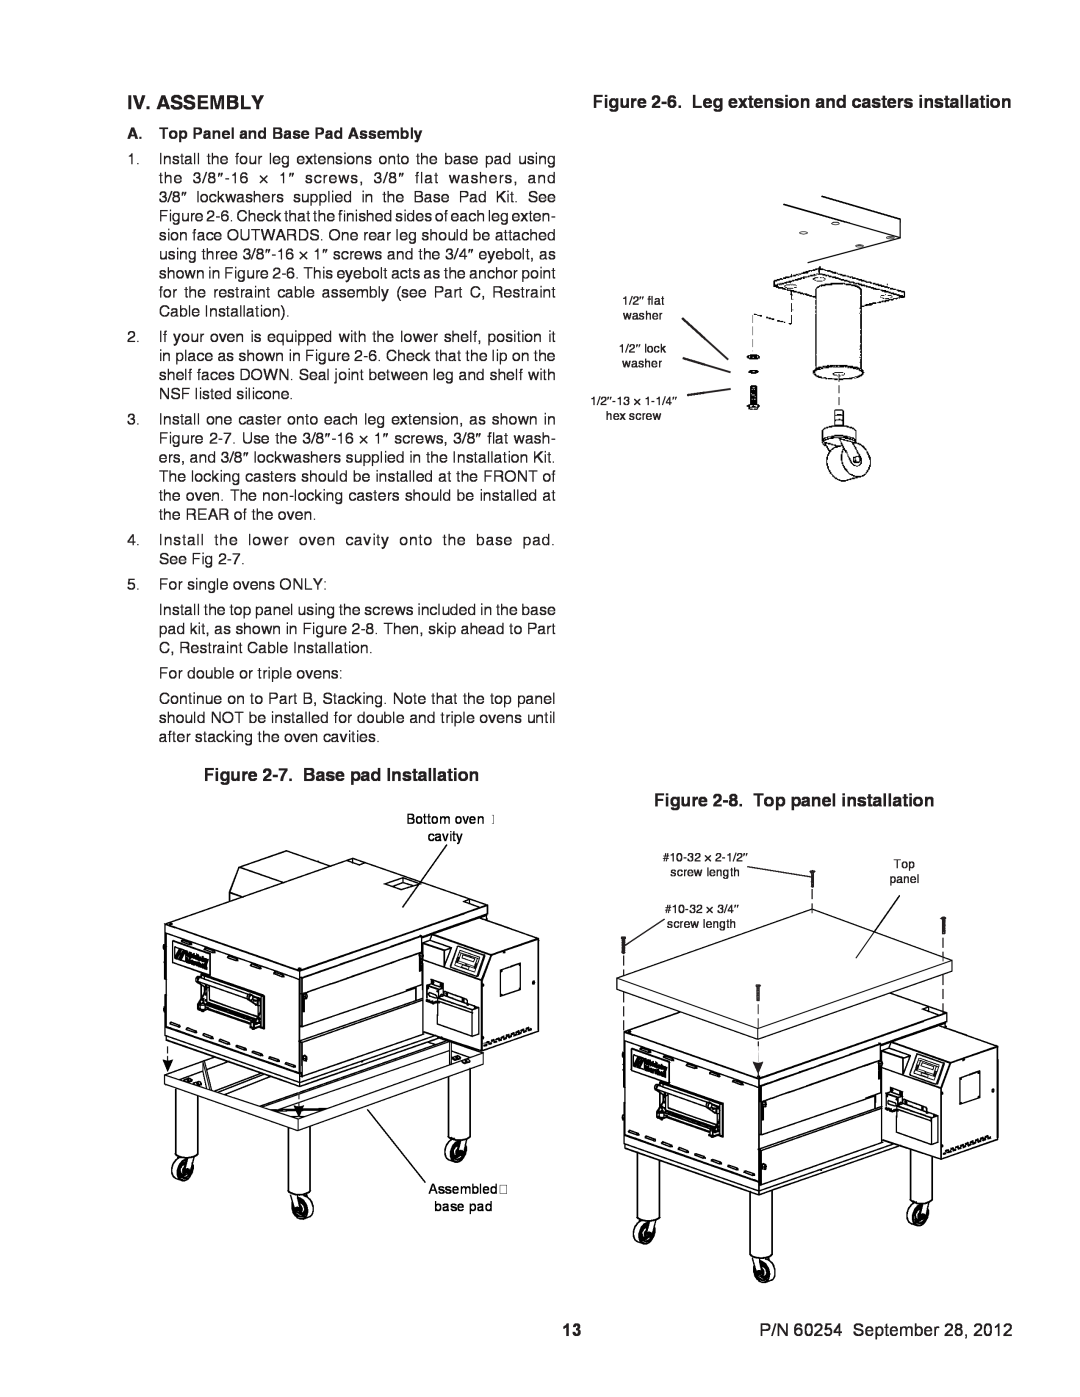 Middleby Marshall 60254 Iv. Assembly, 7. Base pad Installation, 6. Leg extension and casters installation 